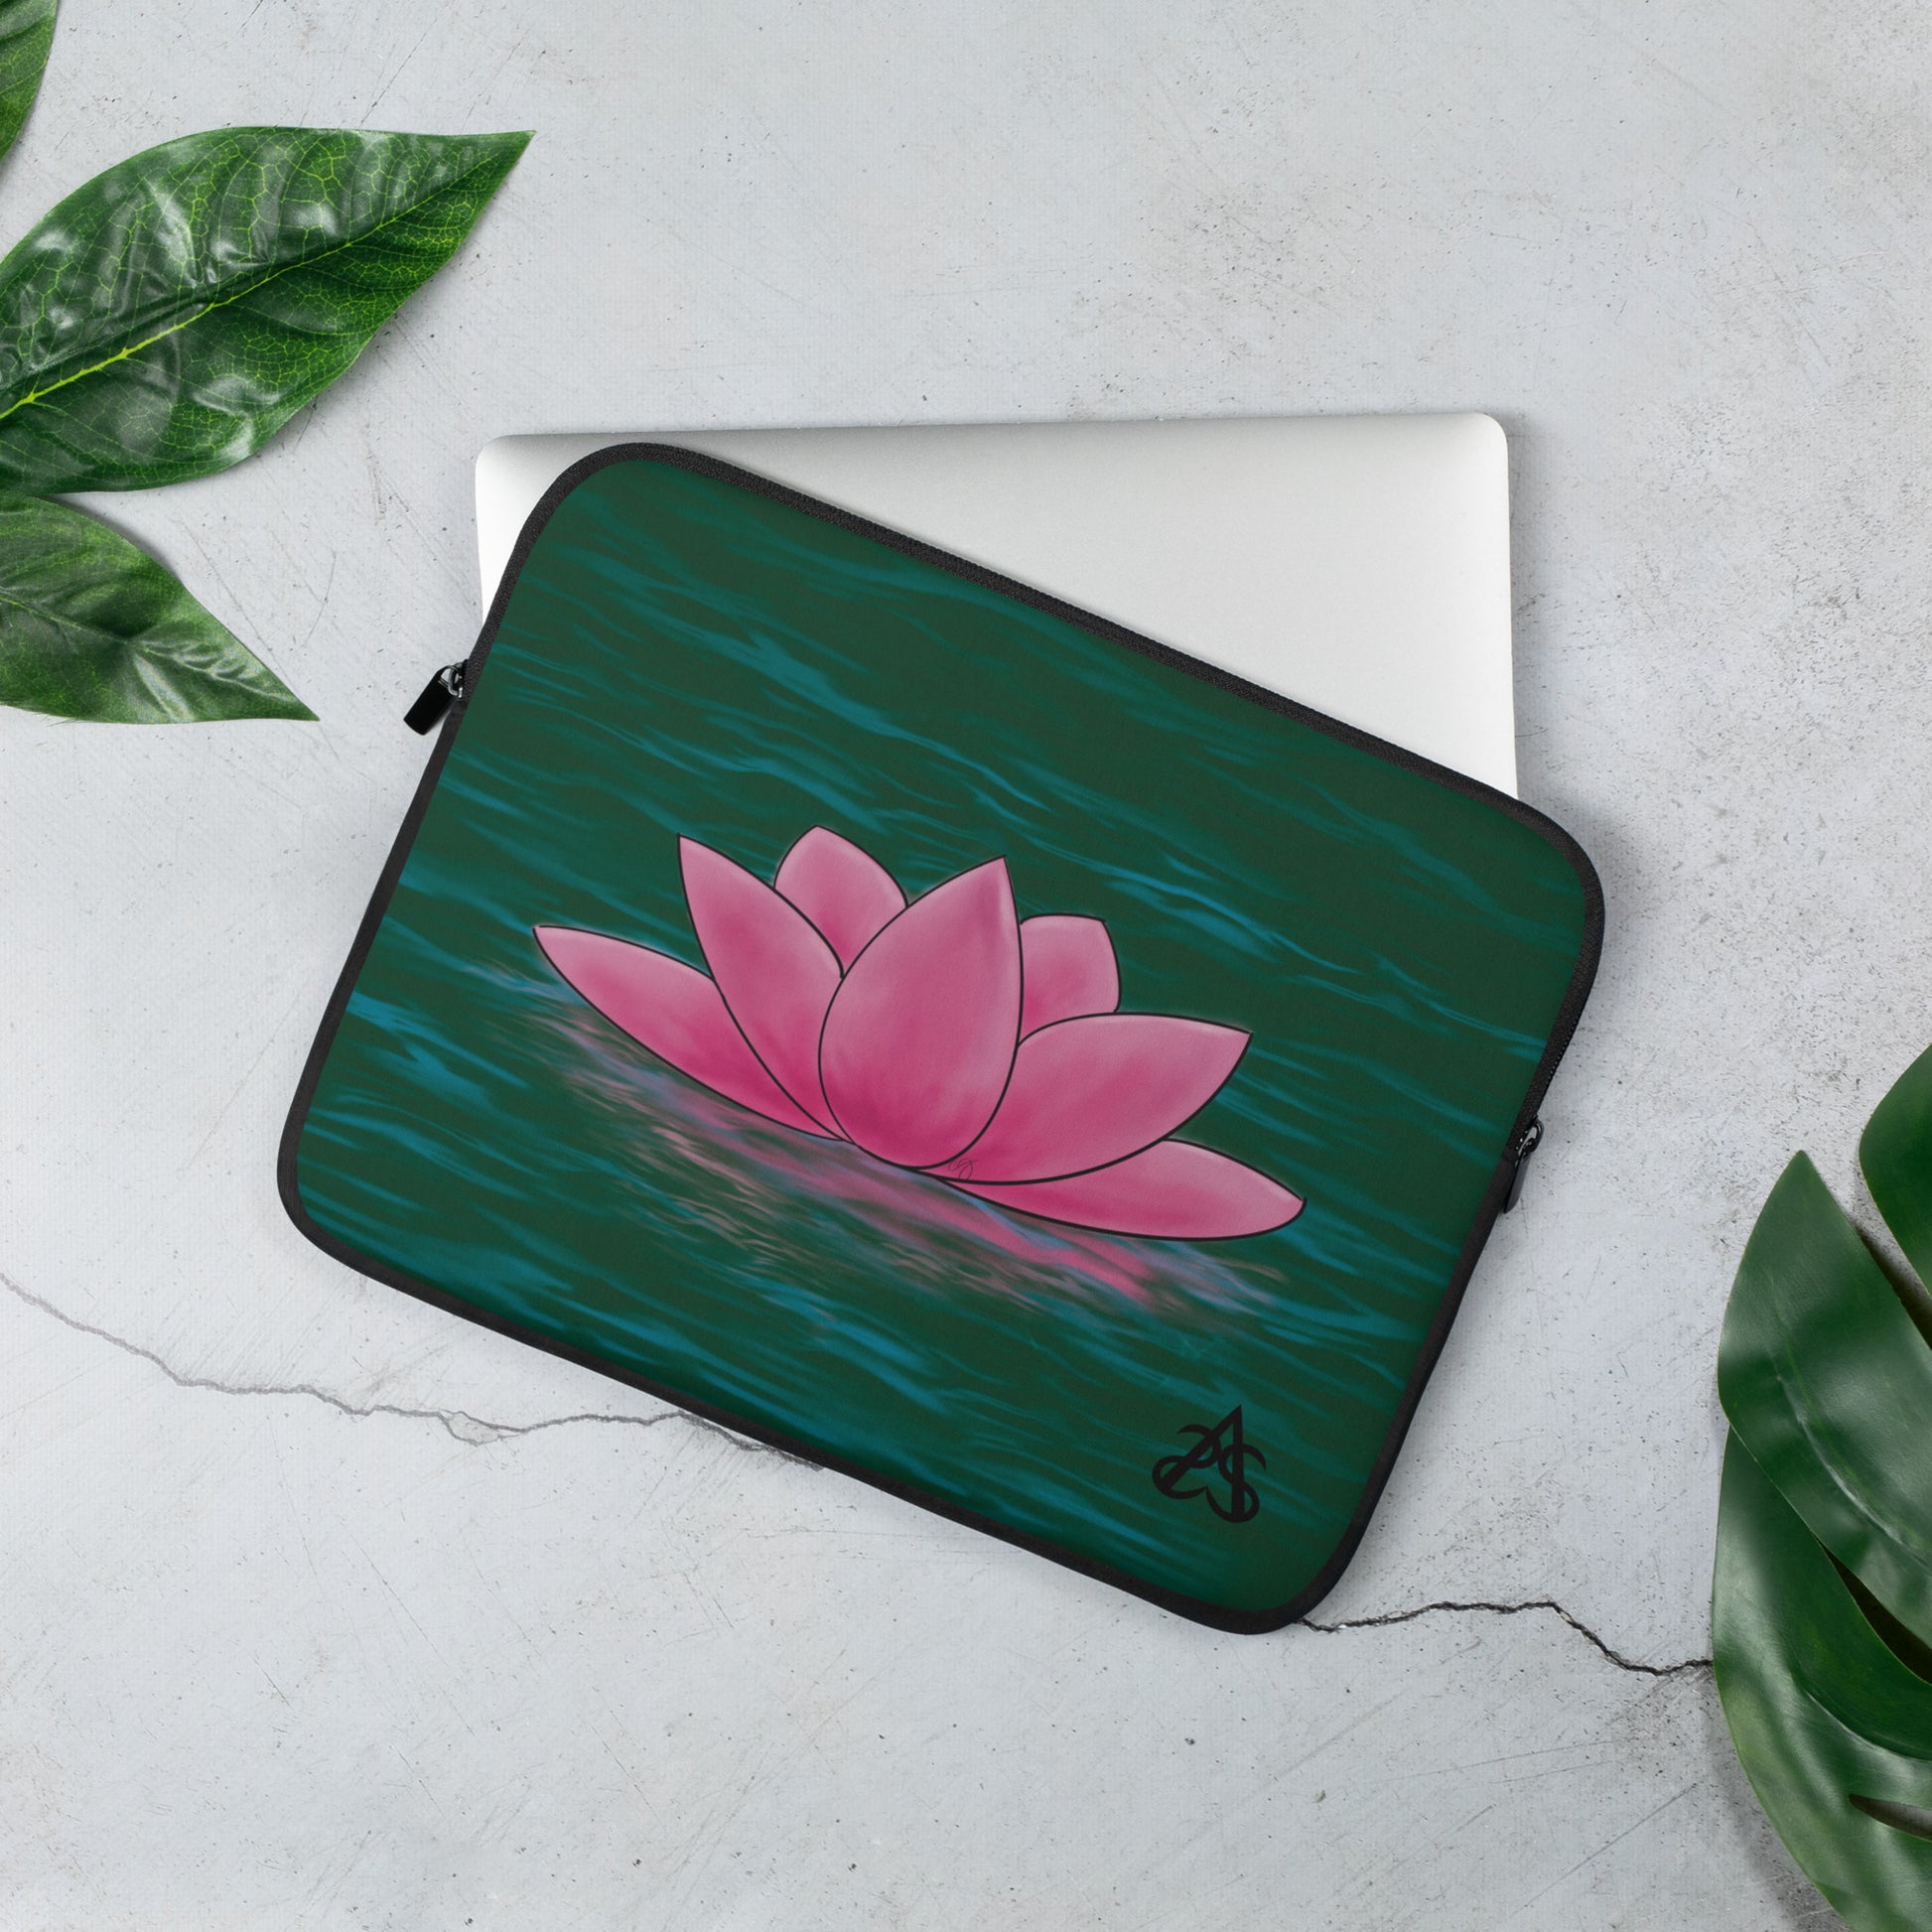 A laptop sleeve with a pink lotus flower on blue-green water.